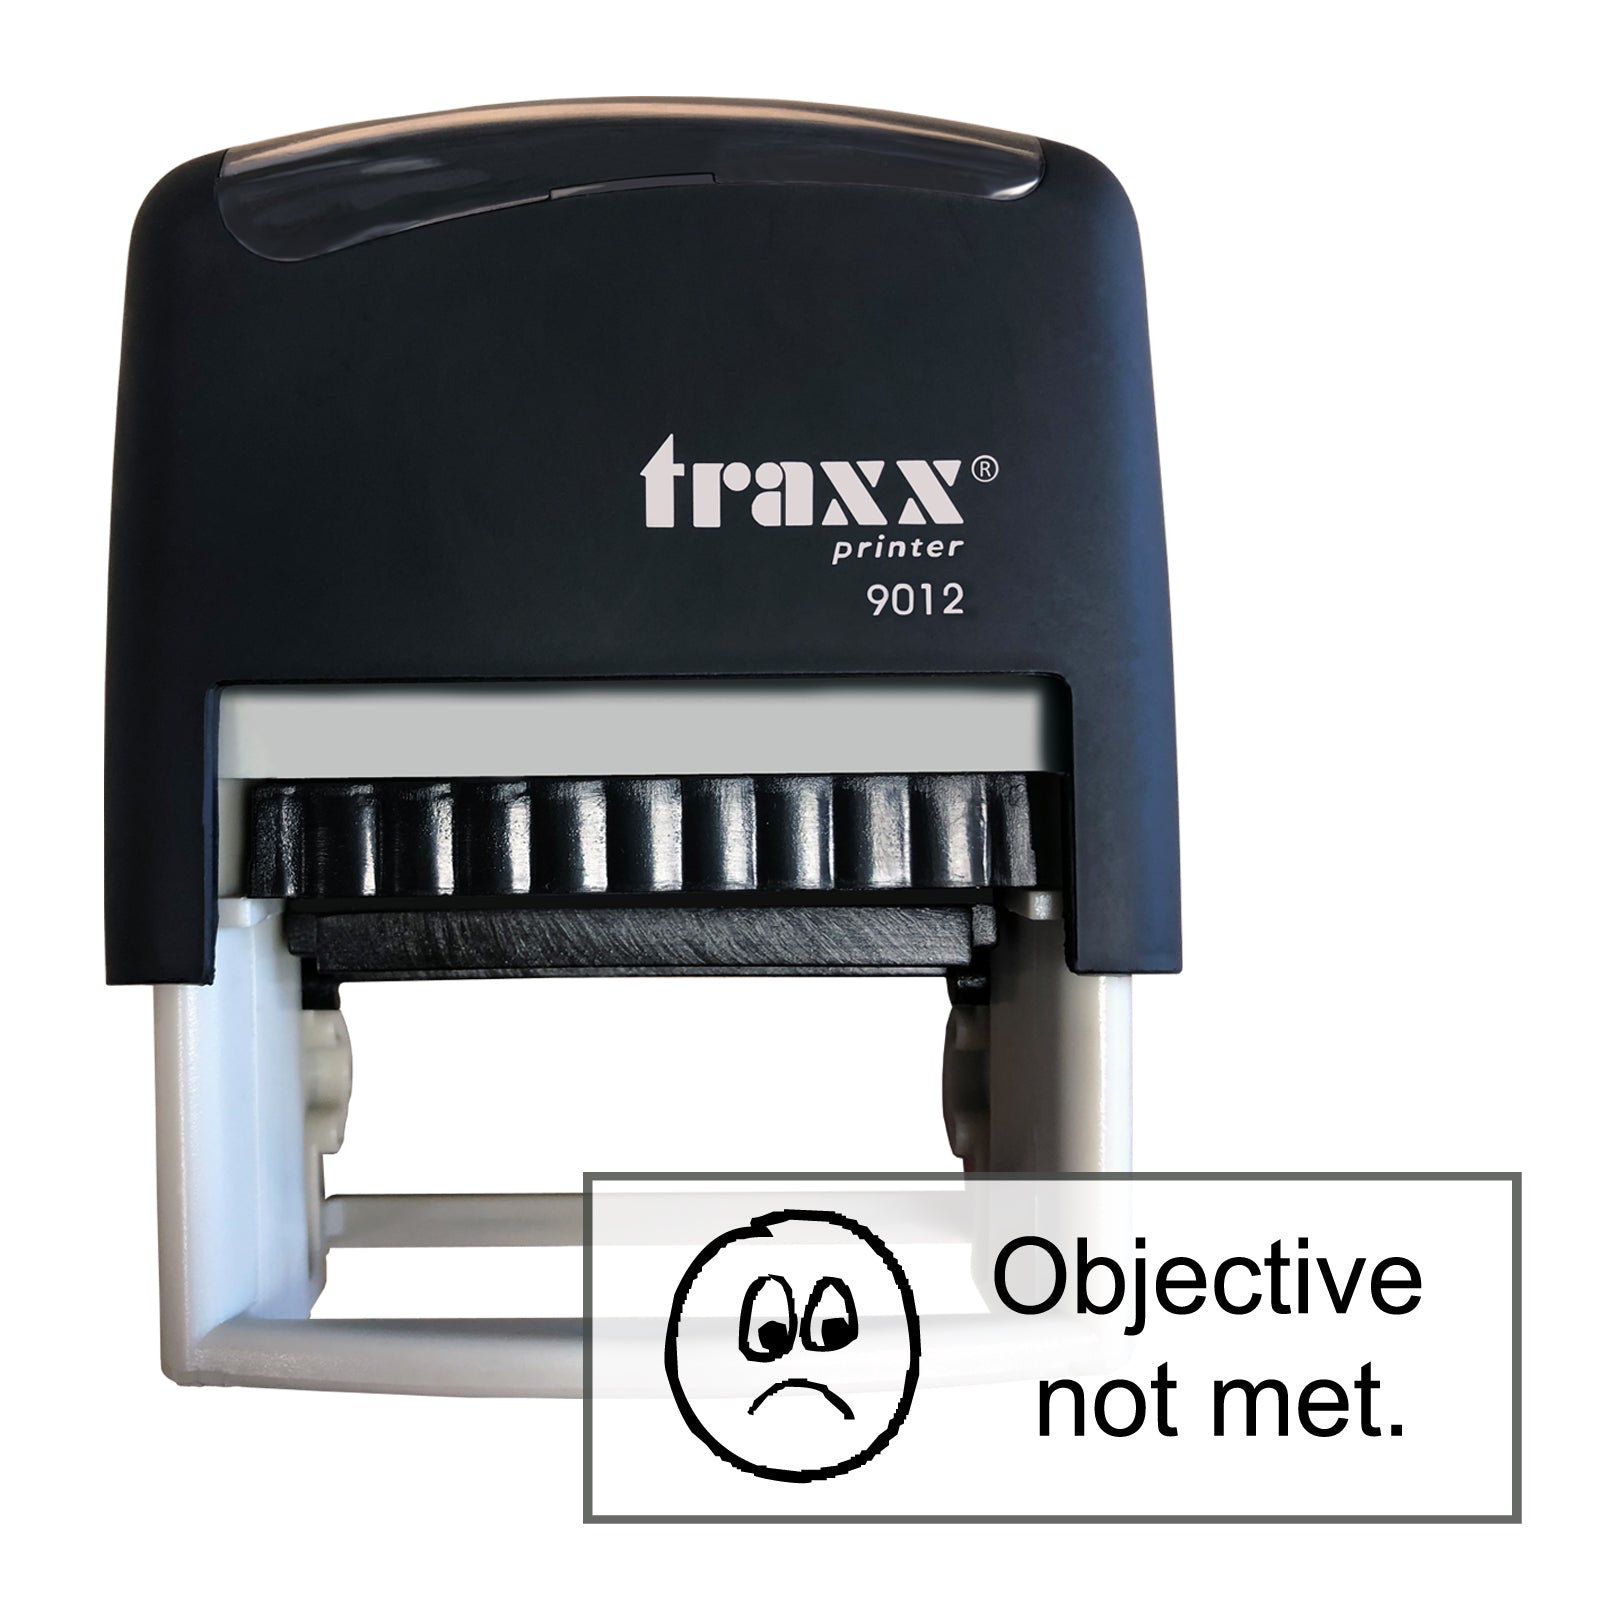 Traxx 9012 48 x 18mm Assessment Stamp - Objective not met